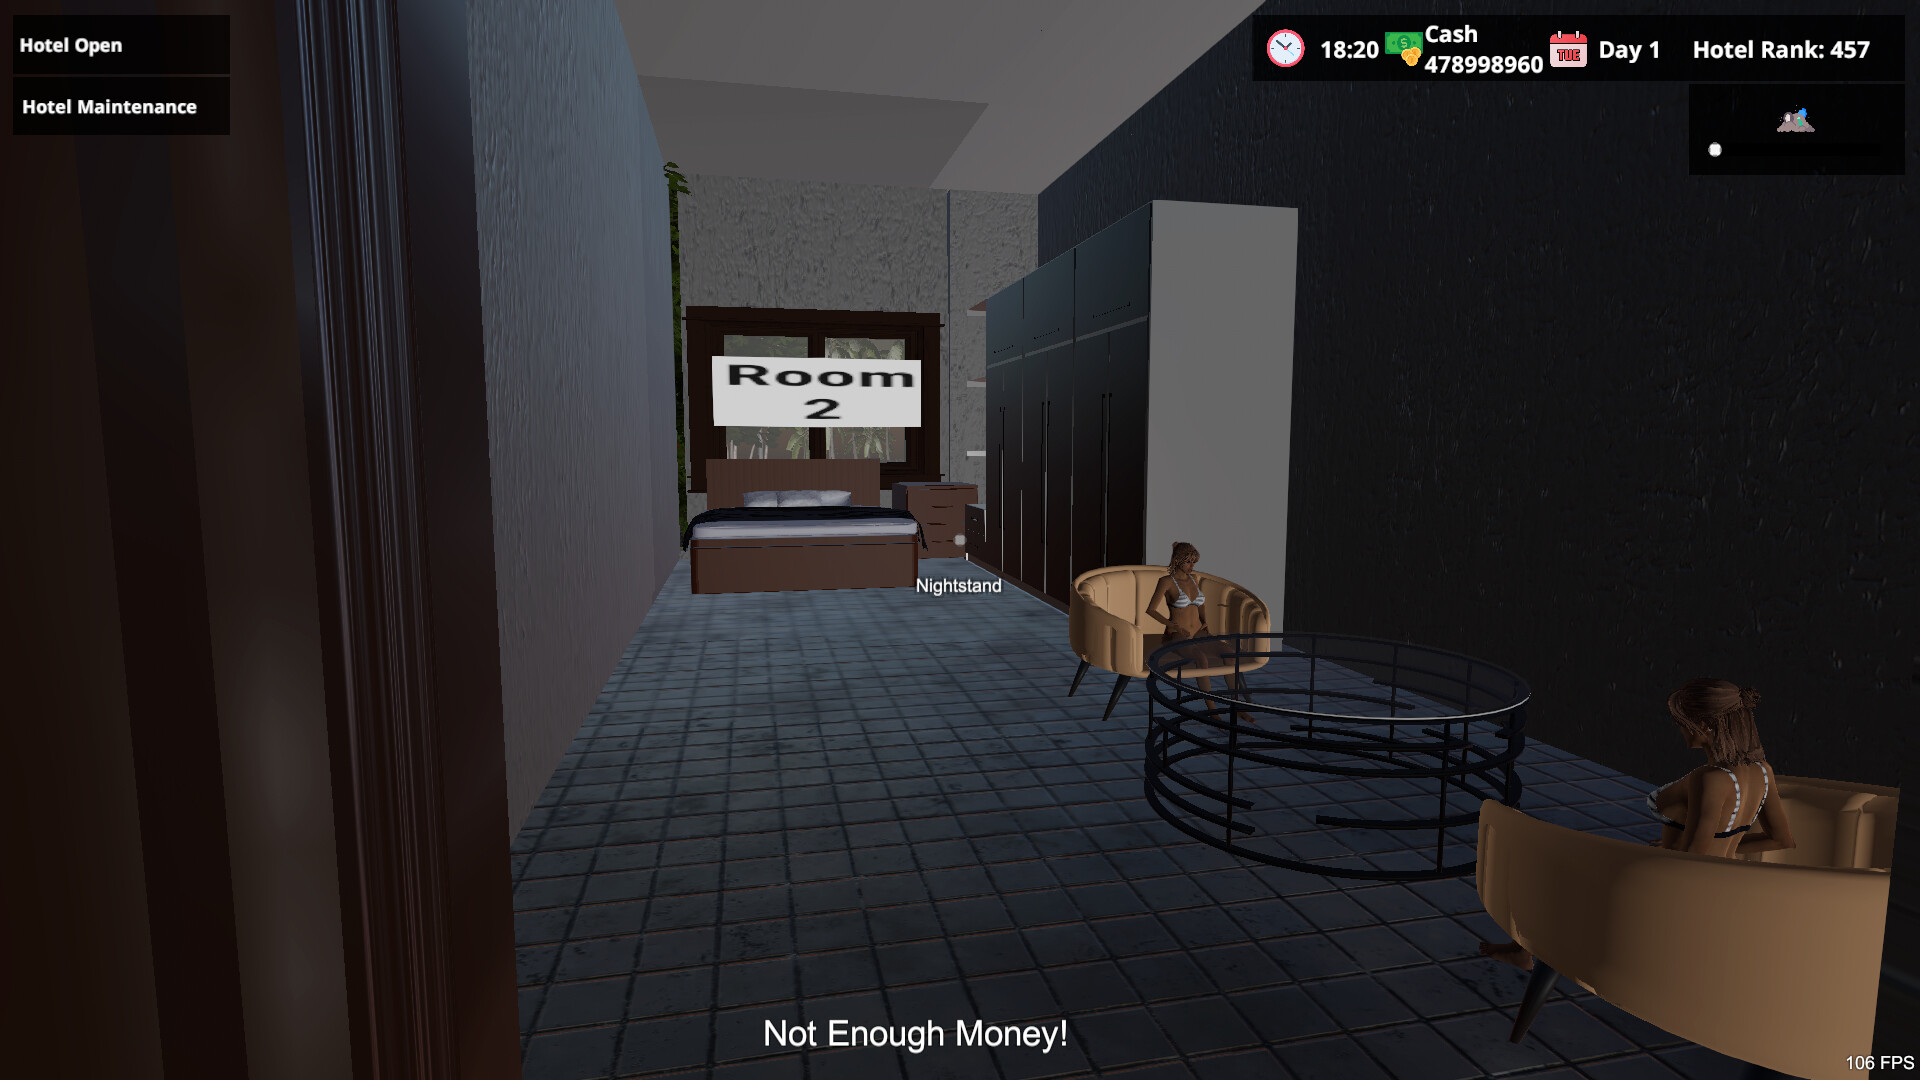 Hotel Legacy, a new hotel simulation game (Work In Progress